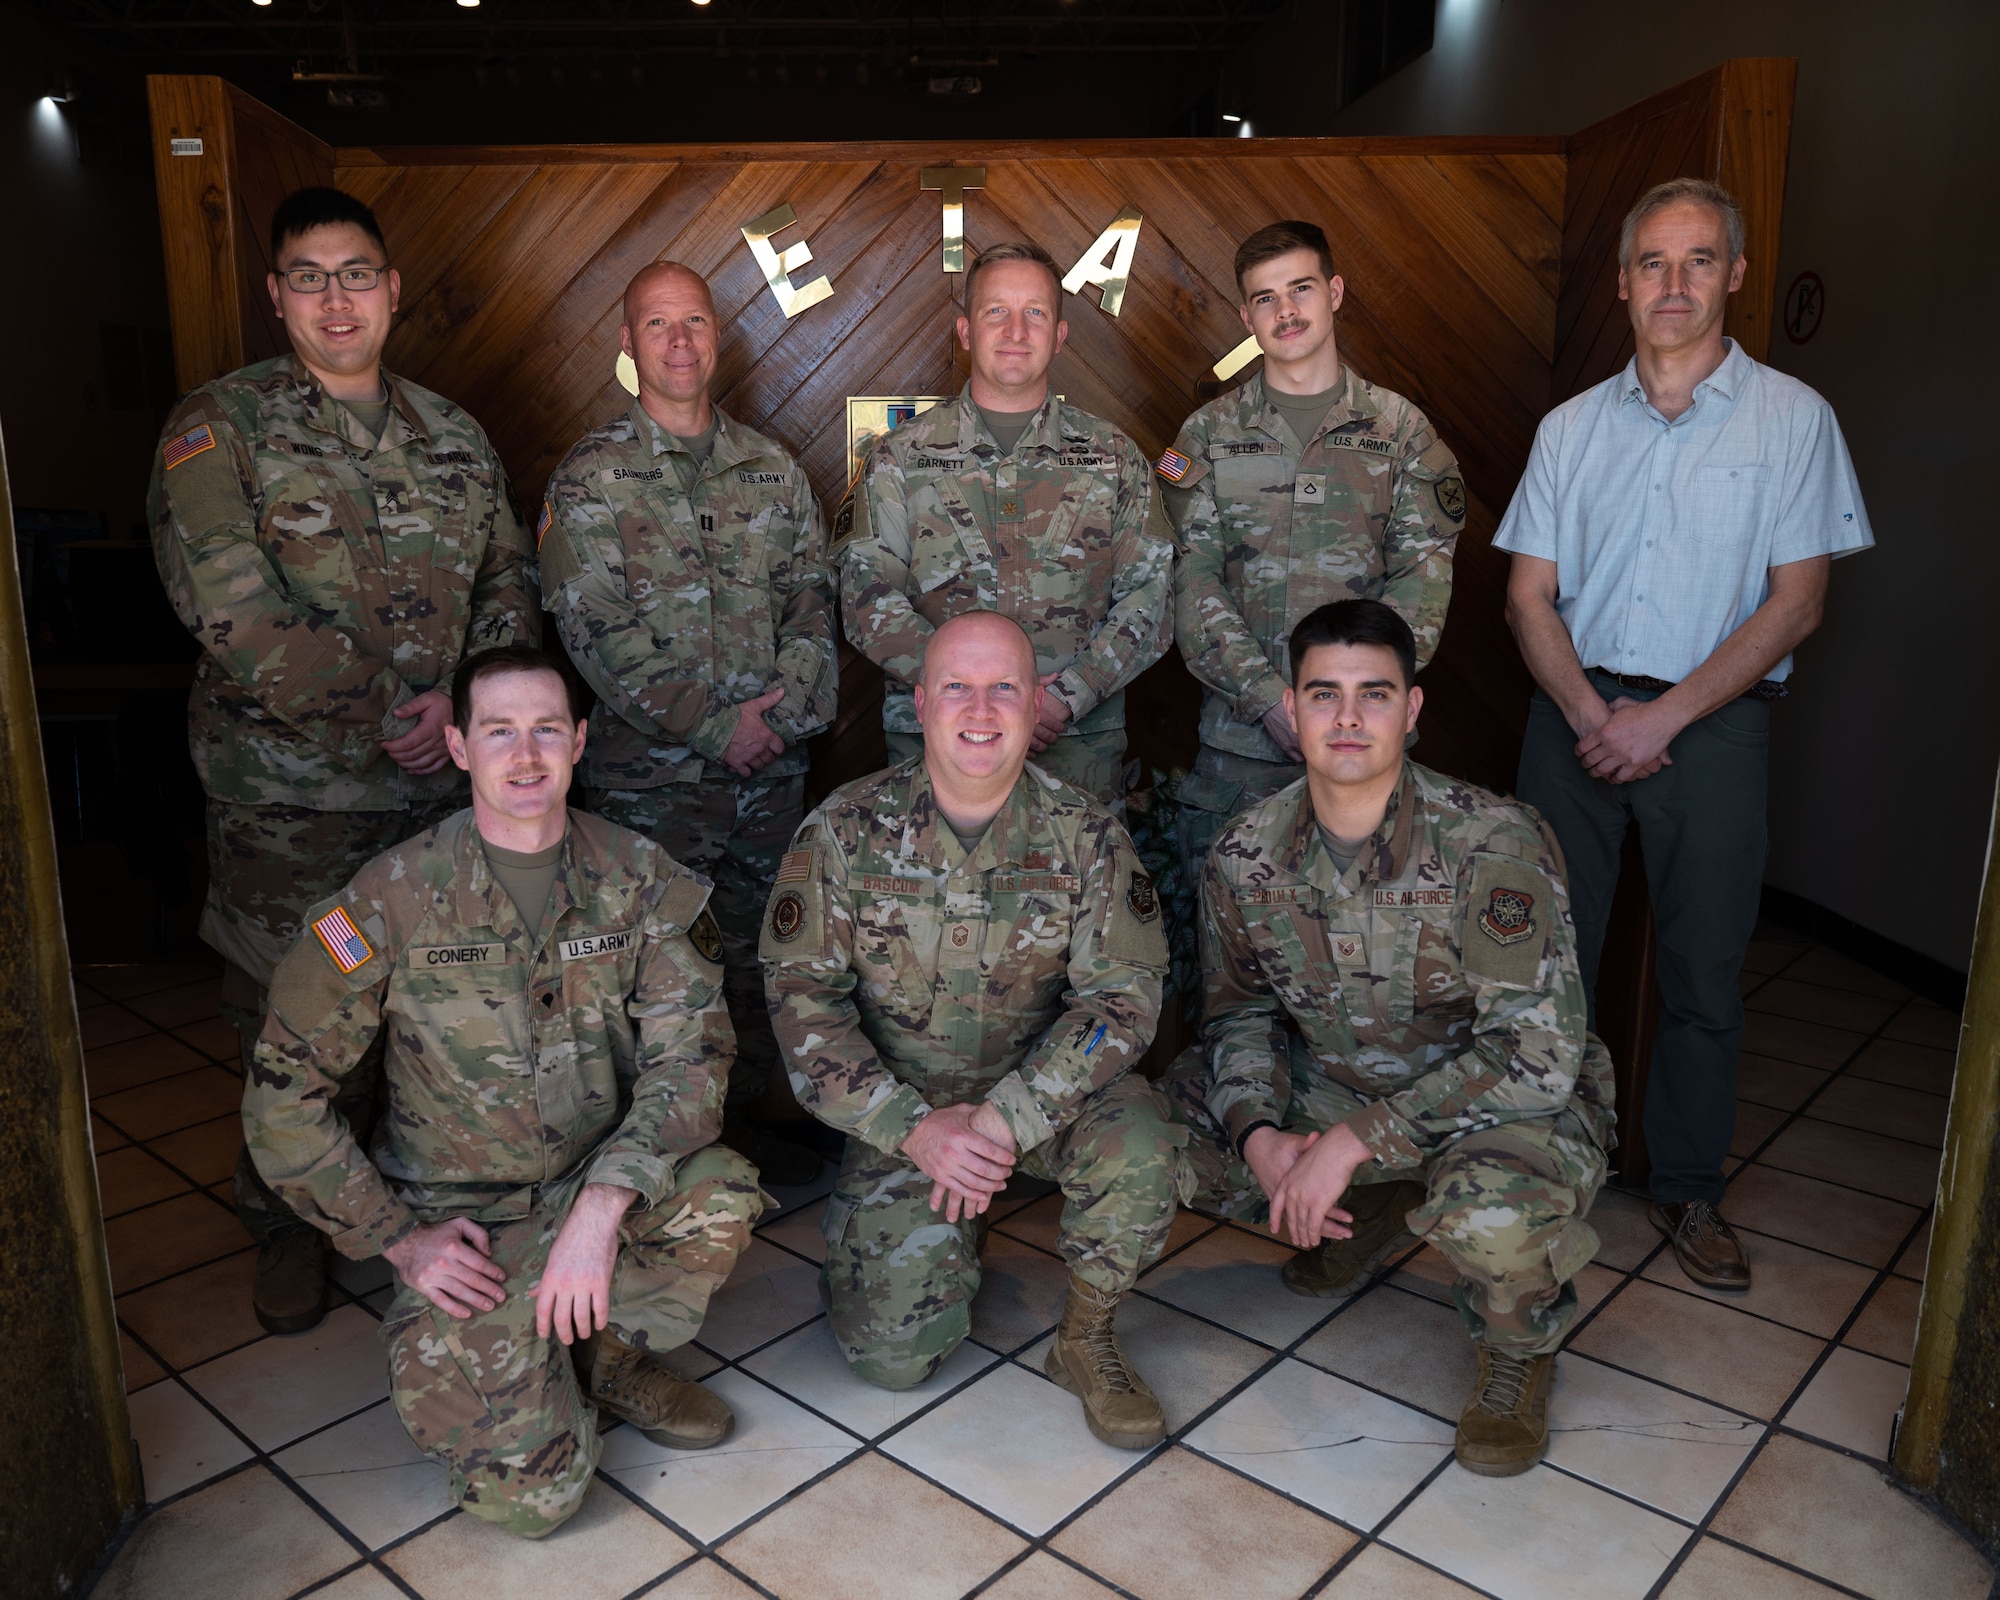 National Guardsmen pose for group photo